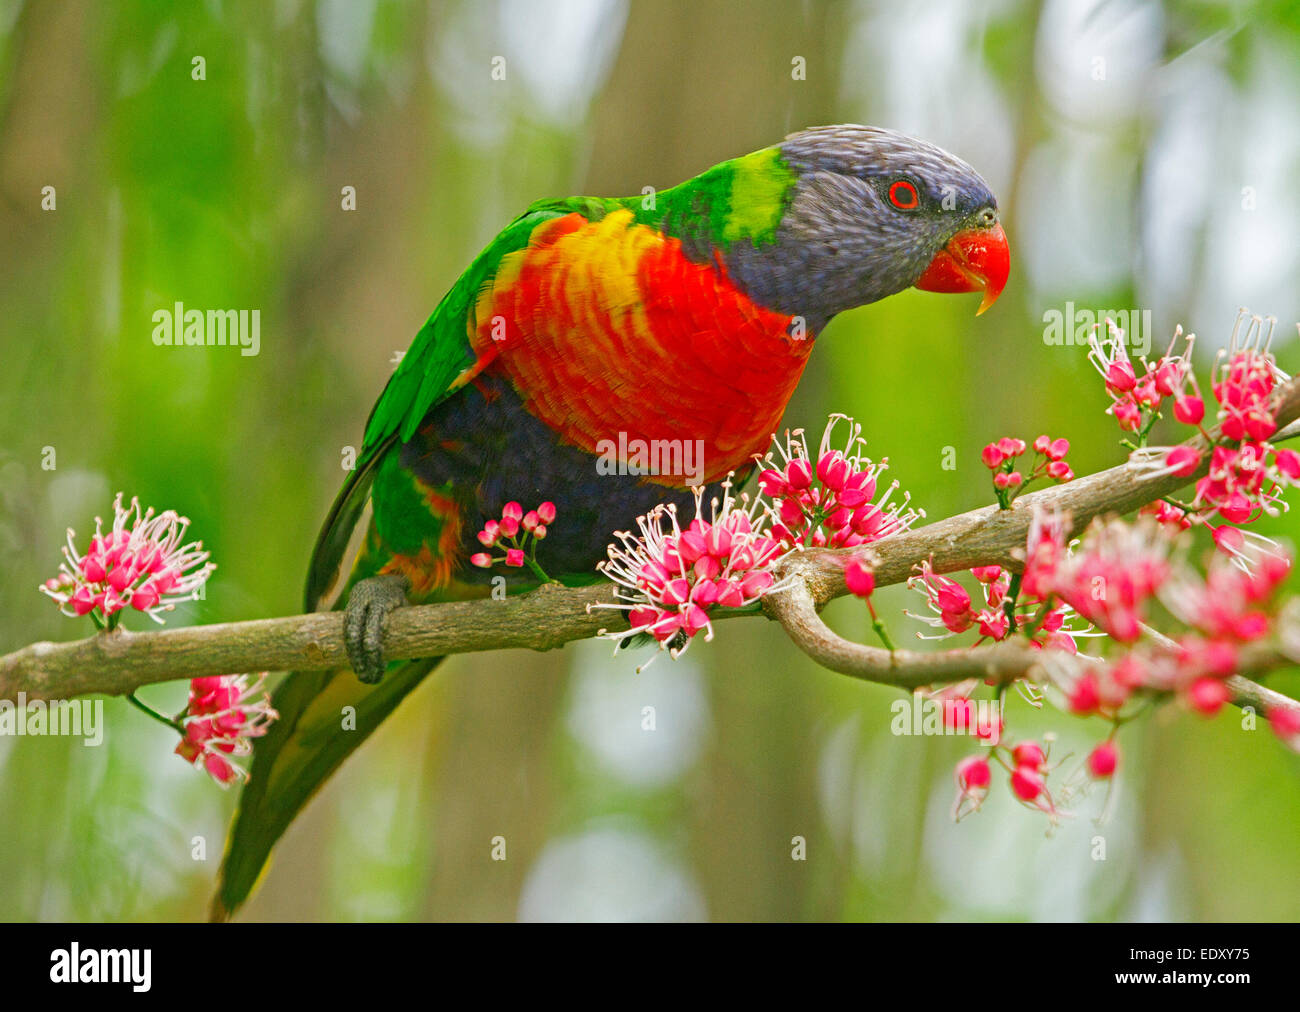 Brightly coloured rainbow lorikeet, Australian parrot in the wild among clusters of pink flowers of native corkwood tree, Melicope elleryana Stock Photo